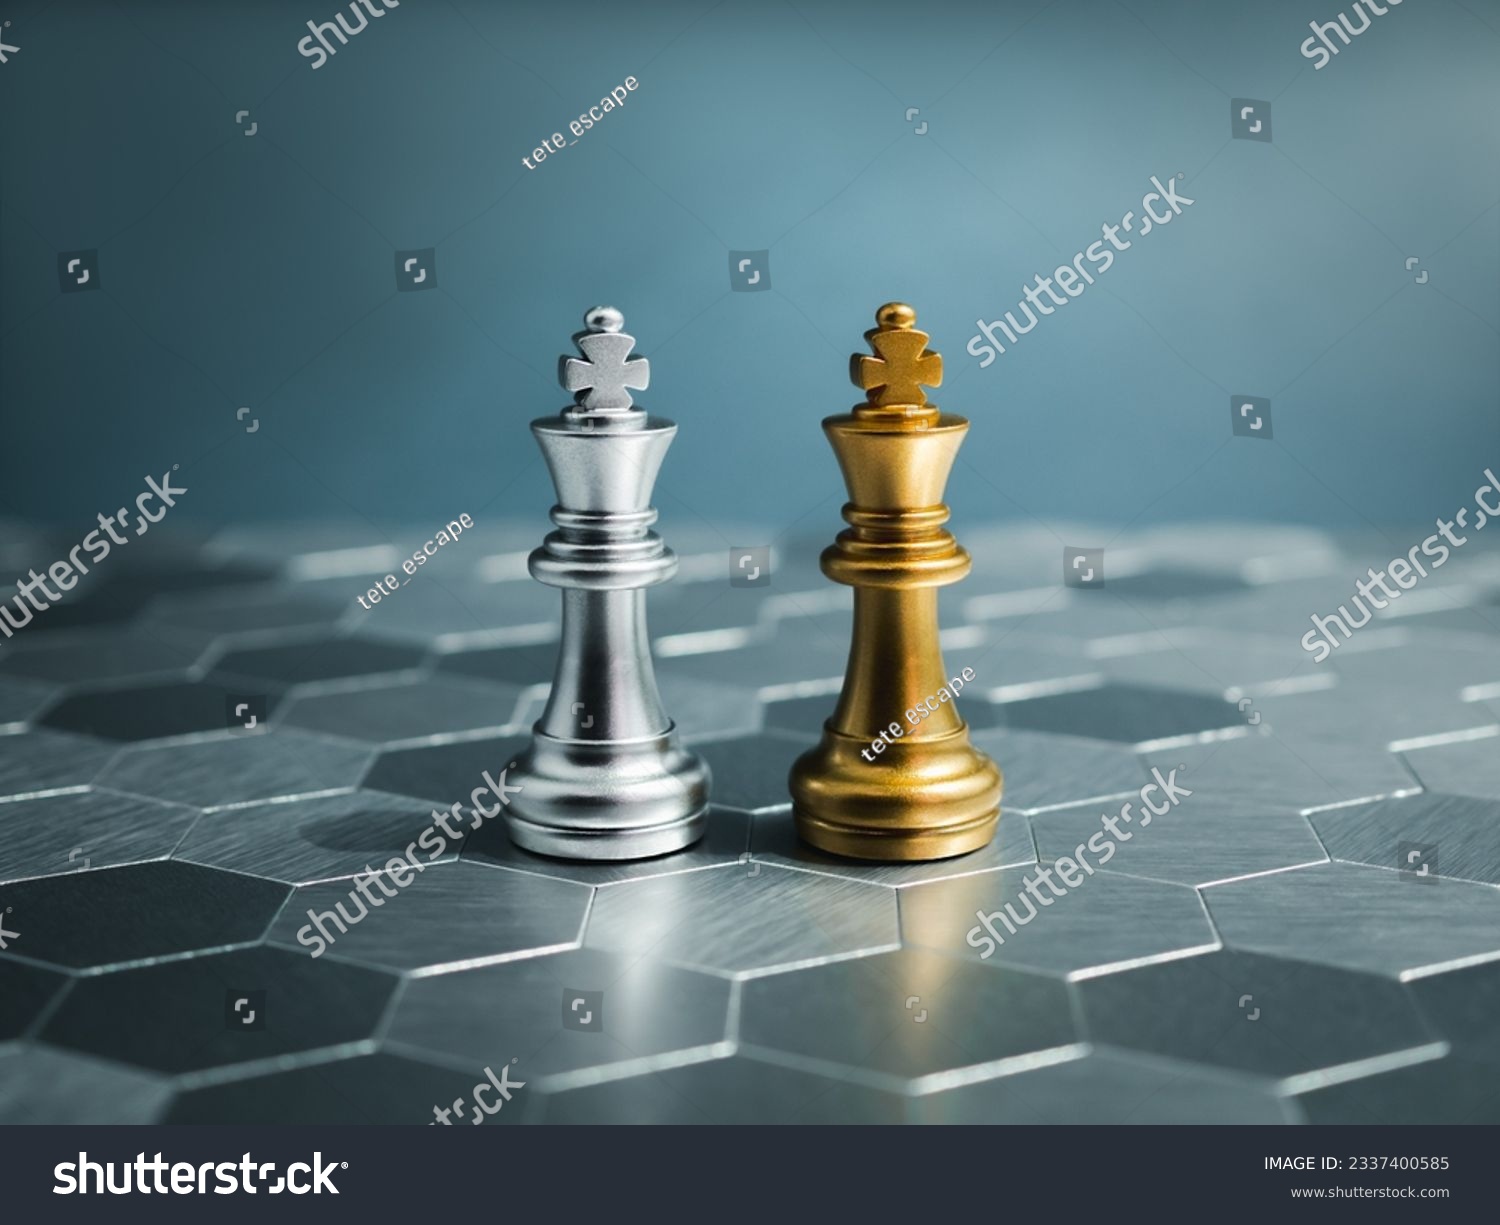 Golden and silver king, luxury chess pieces standing together on a silver hexagon pattern chessboard on blue background. Leader, friend, enemy, cooperation, partnership, and business strategy concept. #2337400585